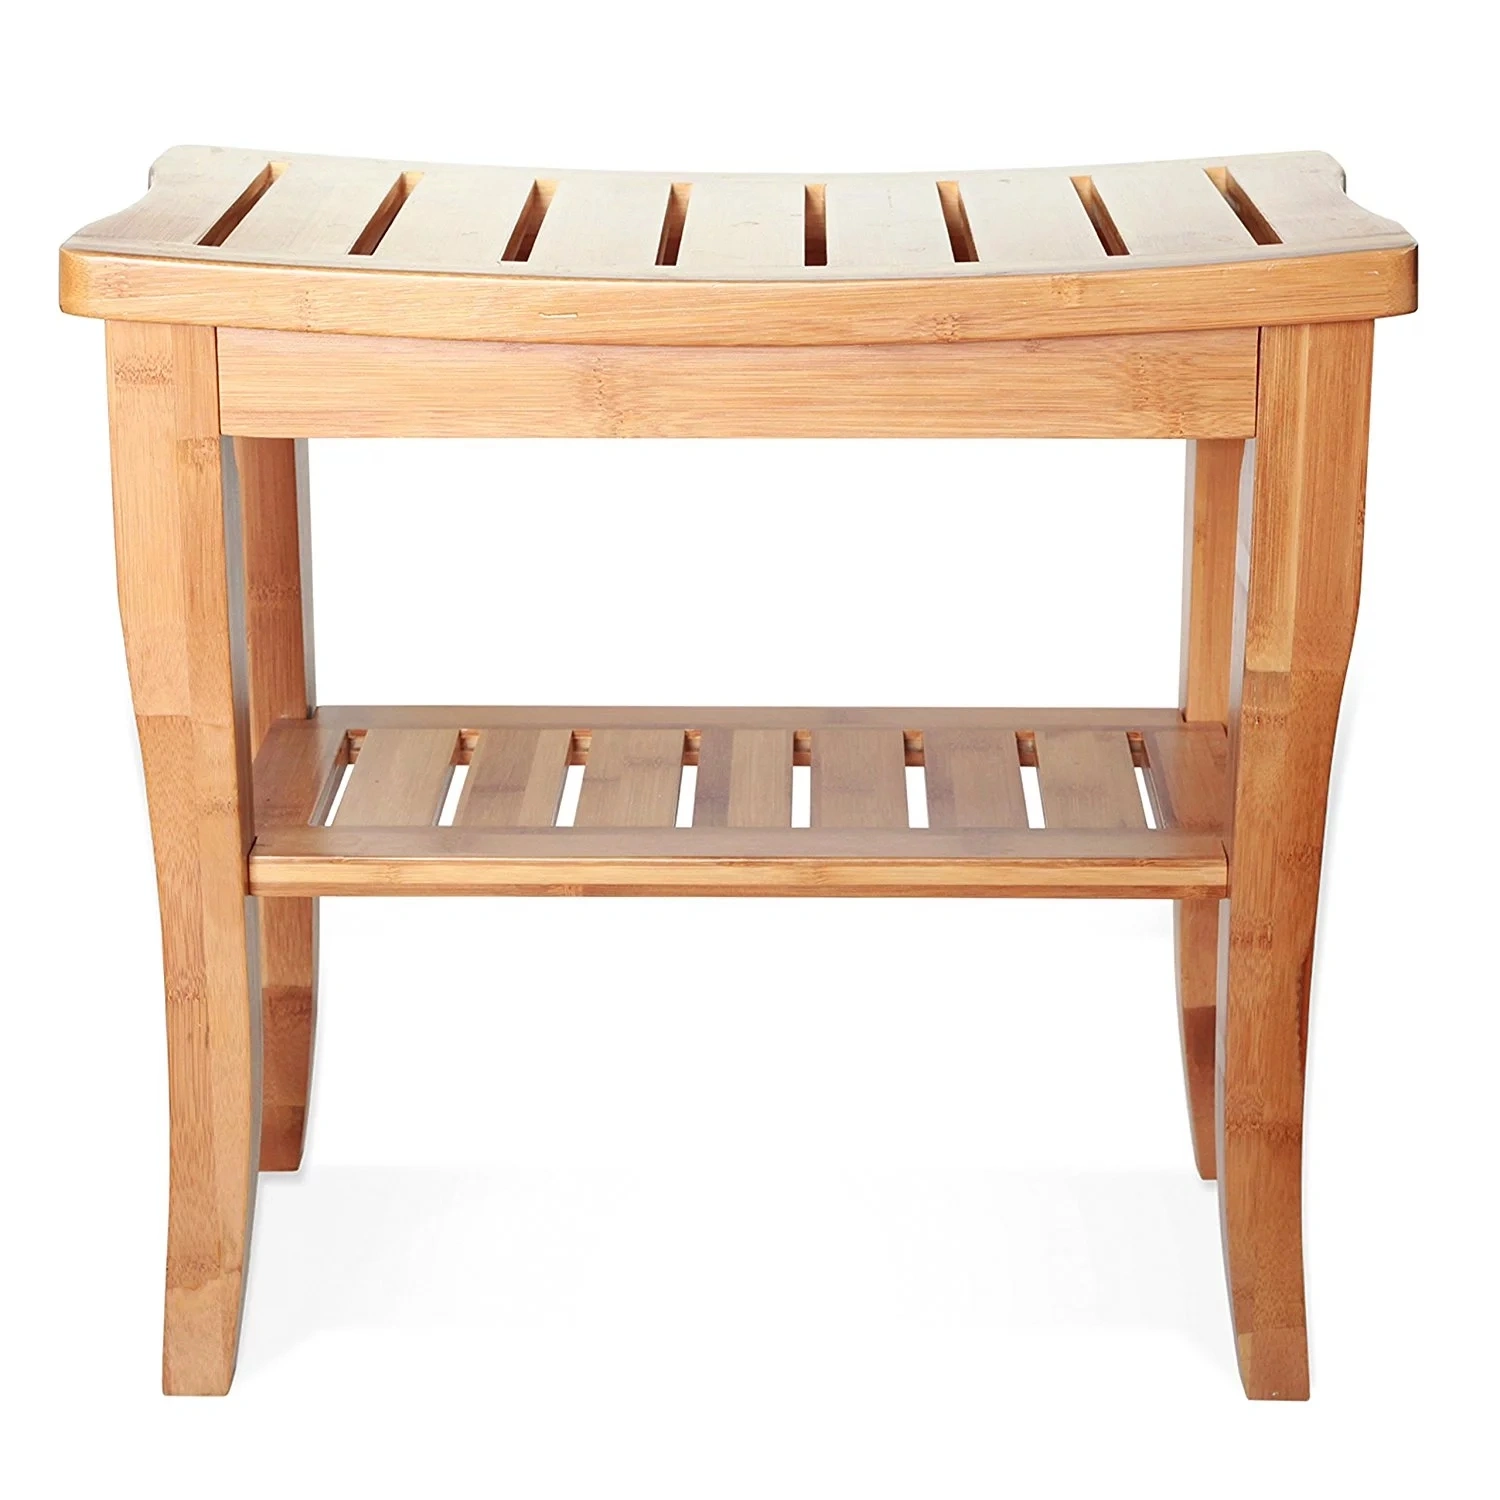 Eco-Friendly High Quality Bamboo Wooden Spa Stool Bathroom Shower Seat Bench